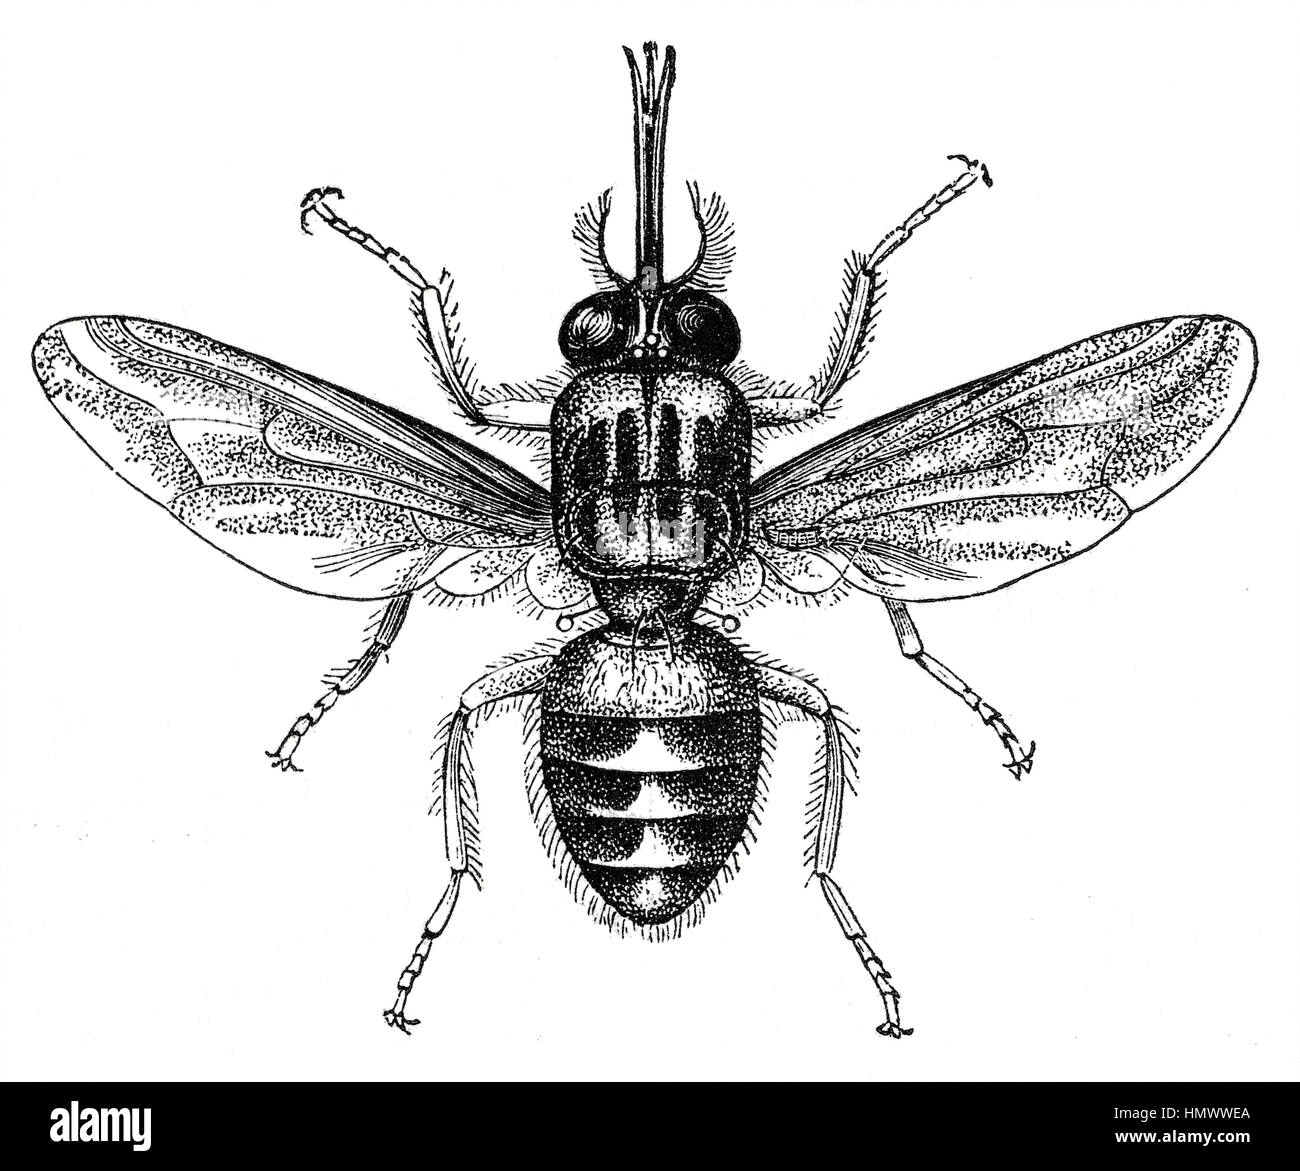 Tsetse Fly, Africa, Illustration from the book, 'Volkerkunde' by Dr. Fredrich Ratzel, Bibliographisches Institut, Leipzig, 1885 Stock Photo